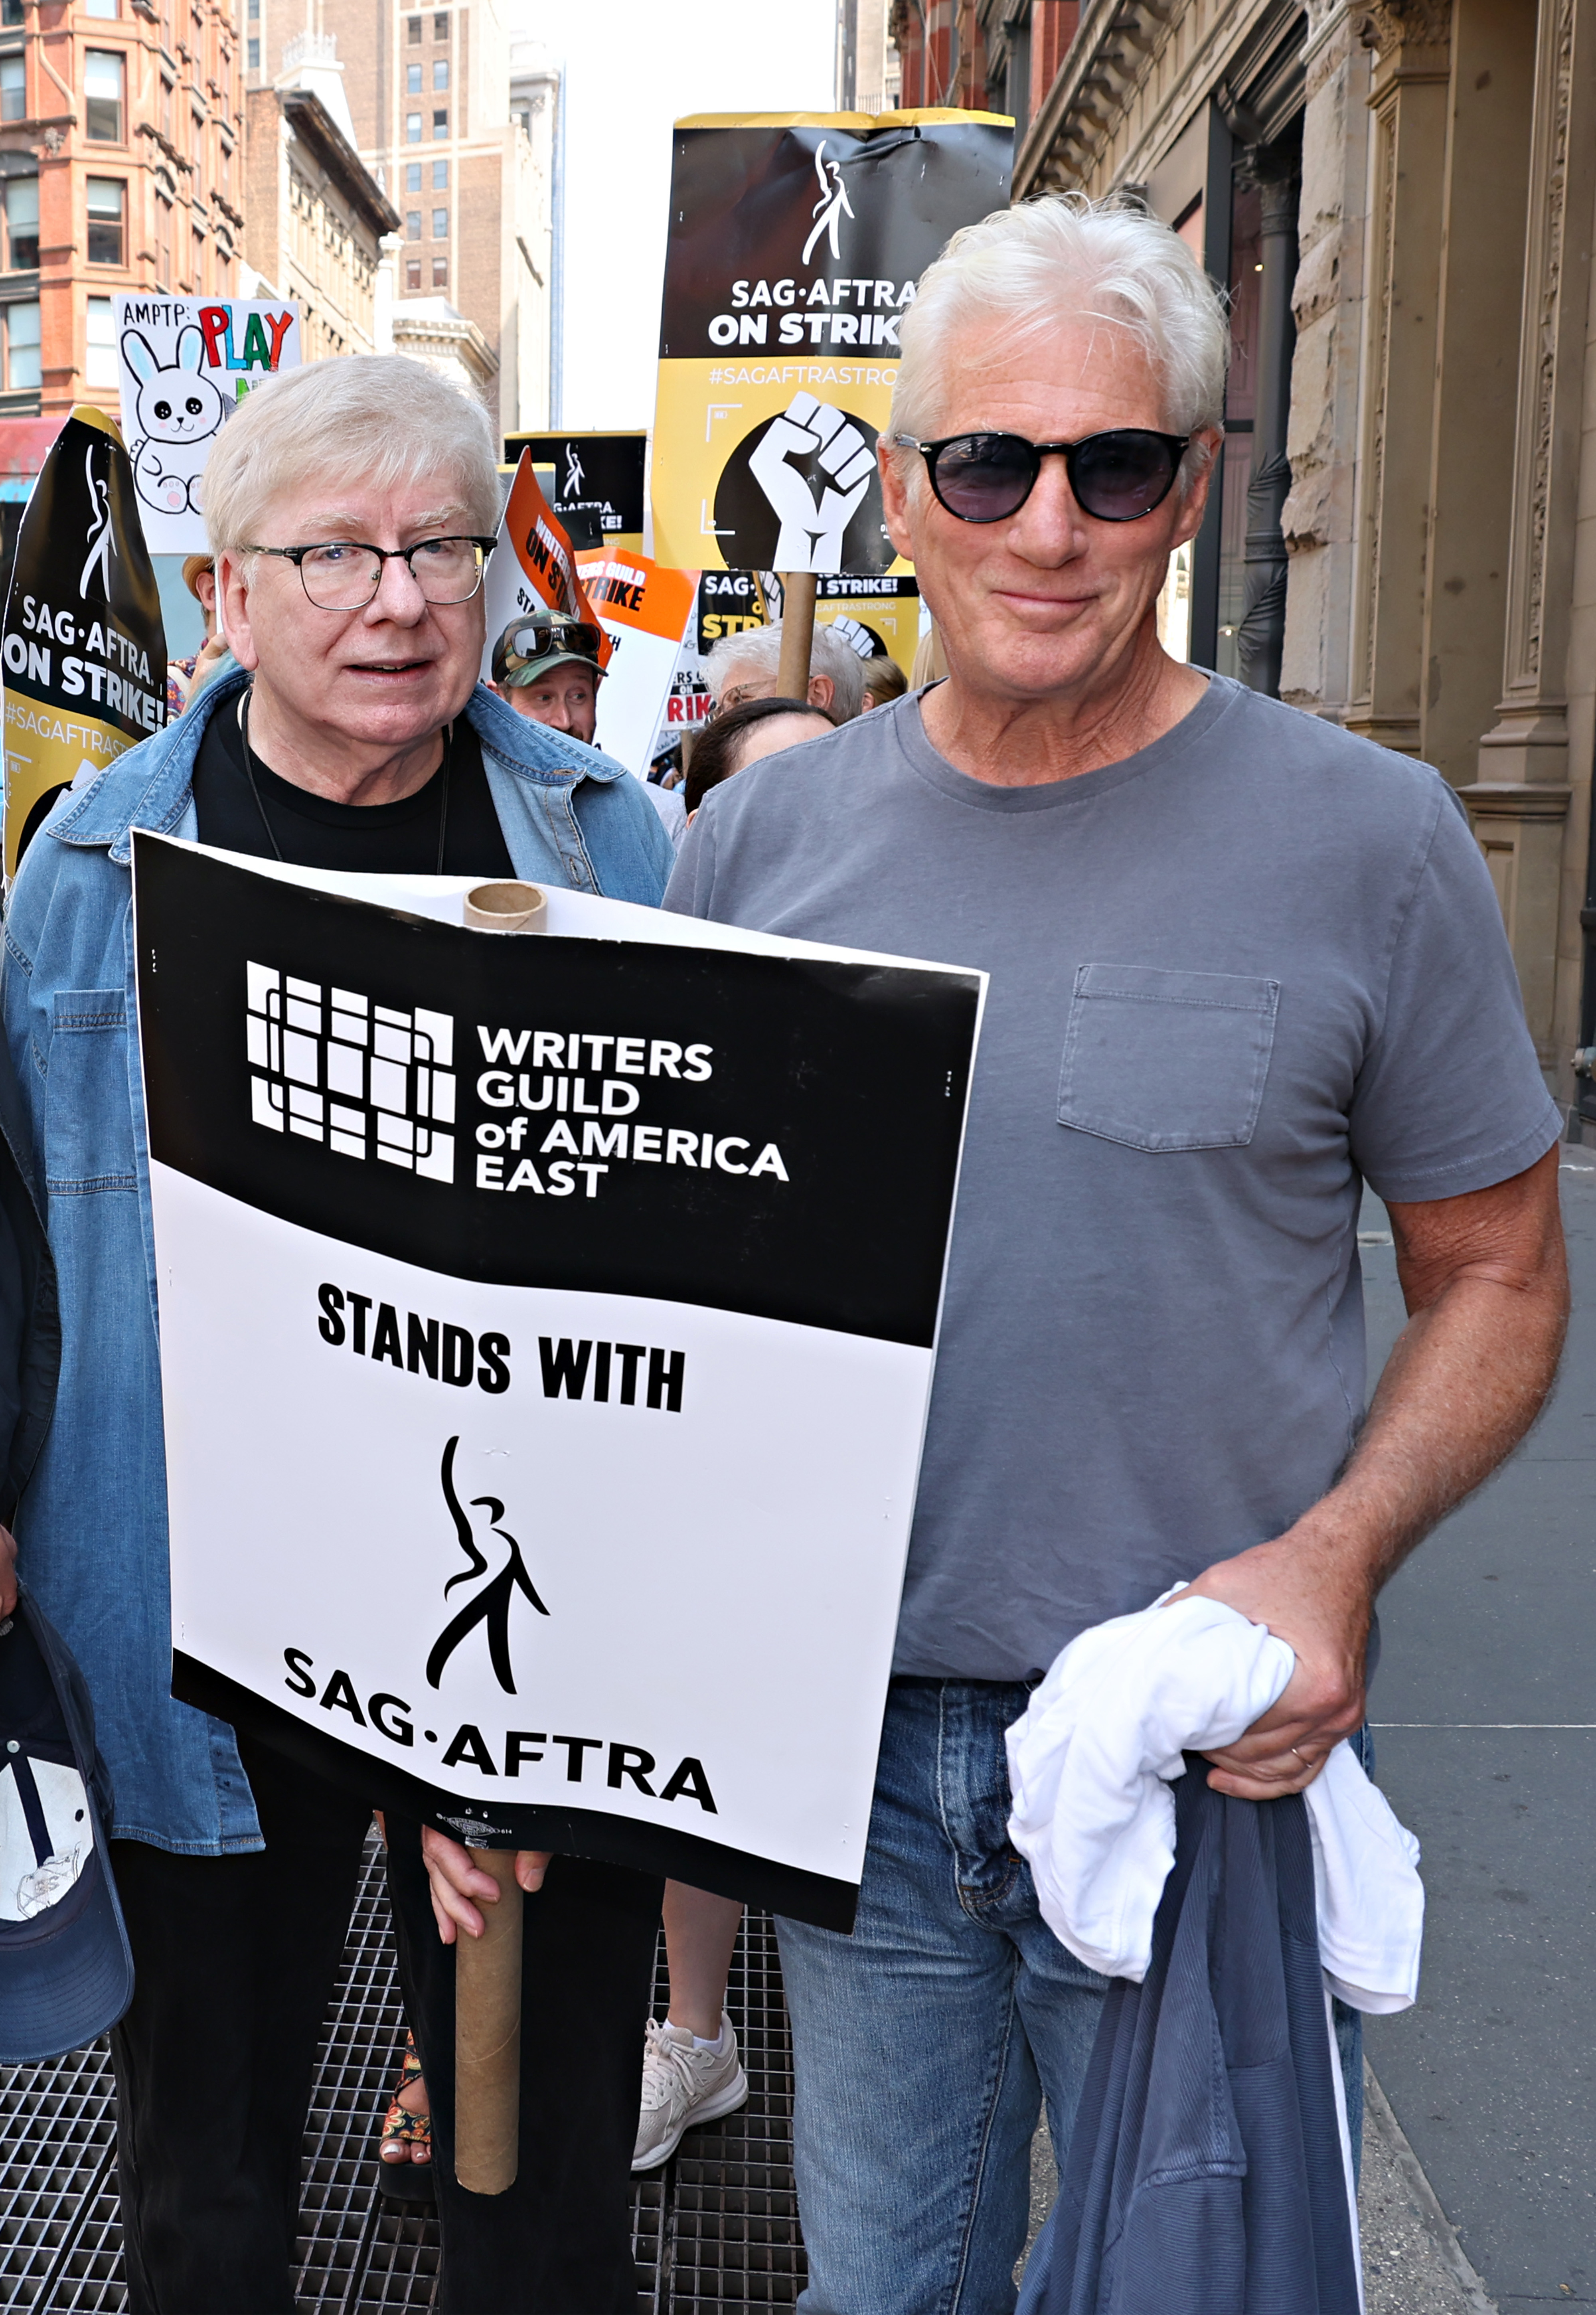 Close-up of Richard smiling and wearing a T-shirt and jeans on the SAG-AFTRA picket line